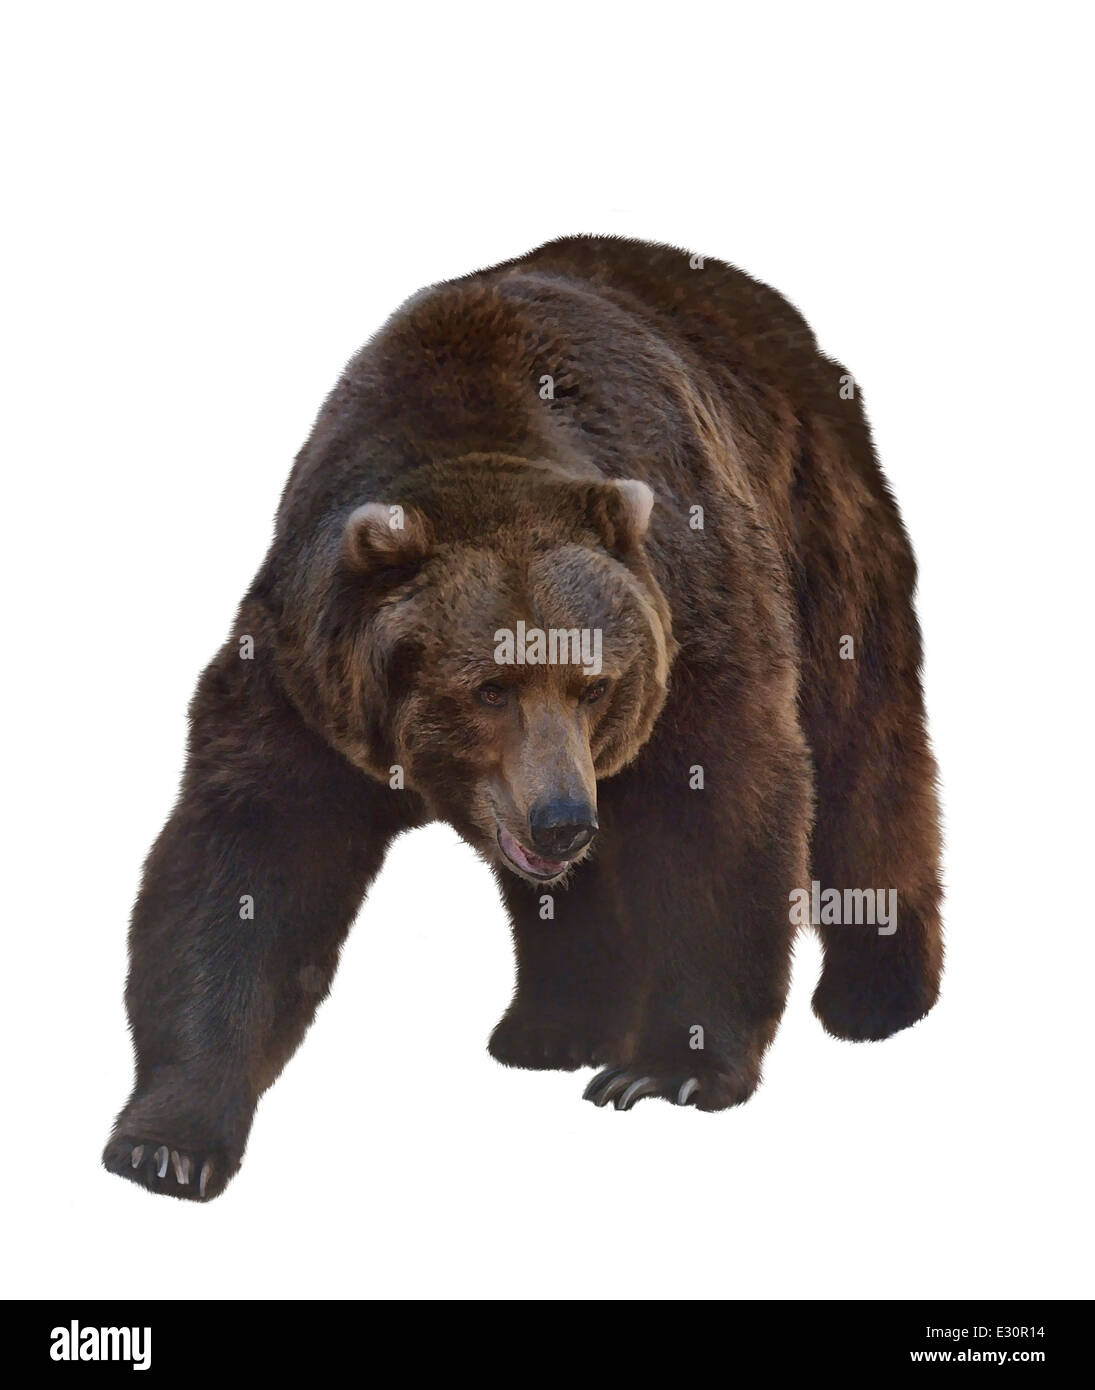 Watercolor Digital Painting Of Grizzly Bear Isolated On White Background Stock Photo